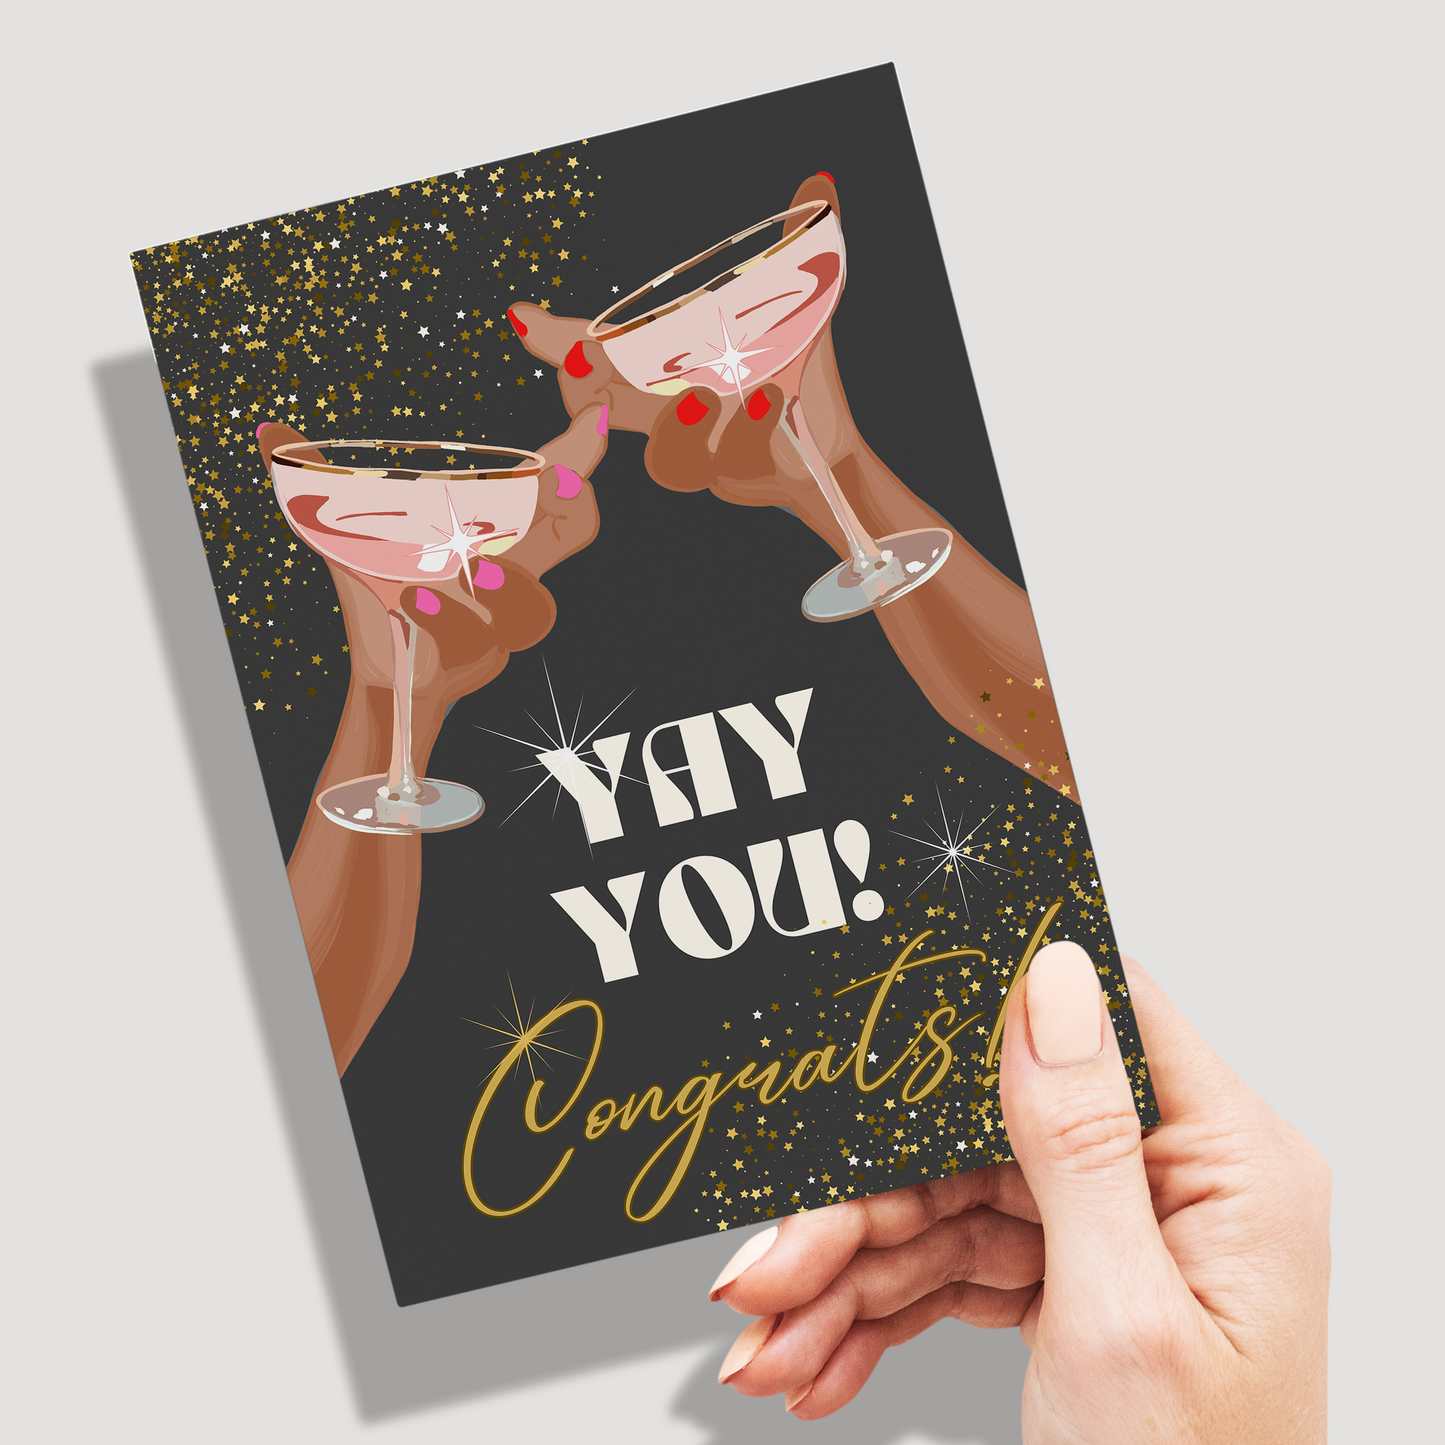 Yay You Cheers Congrats! Greeting card Retro Pack of 10 Greeting Cards (standard envelopes) (US & CA)